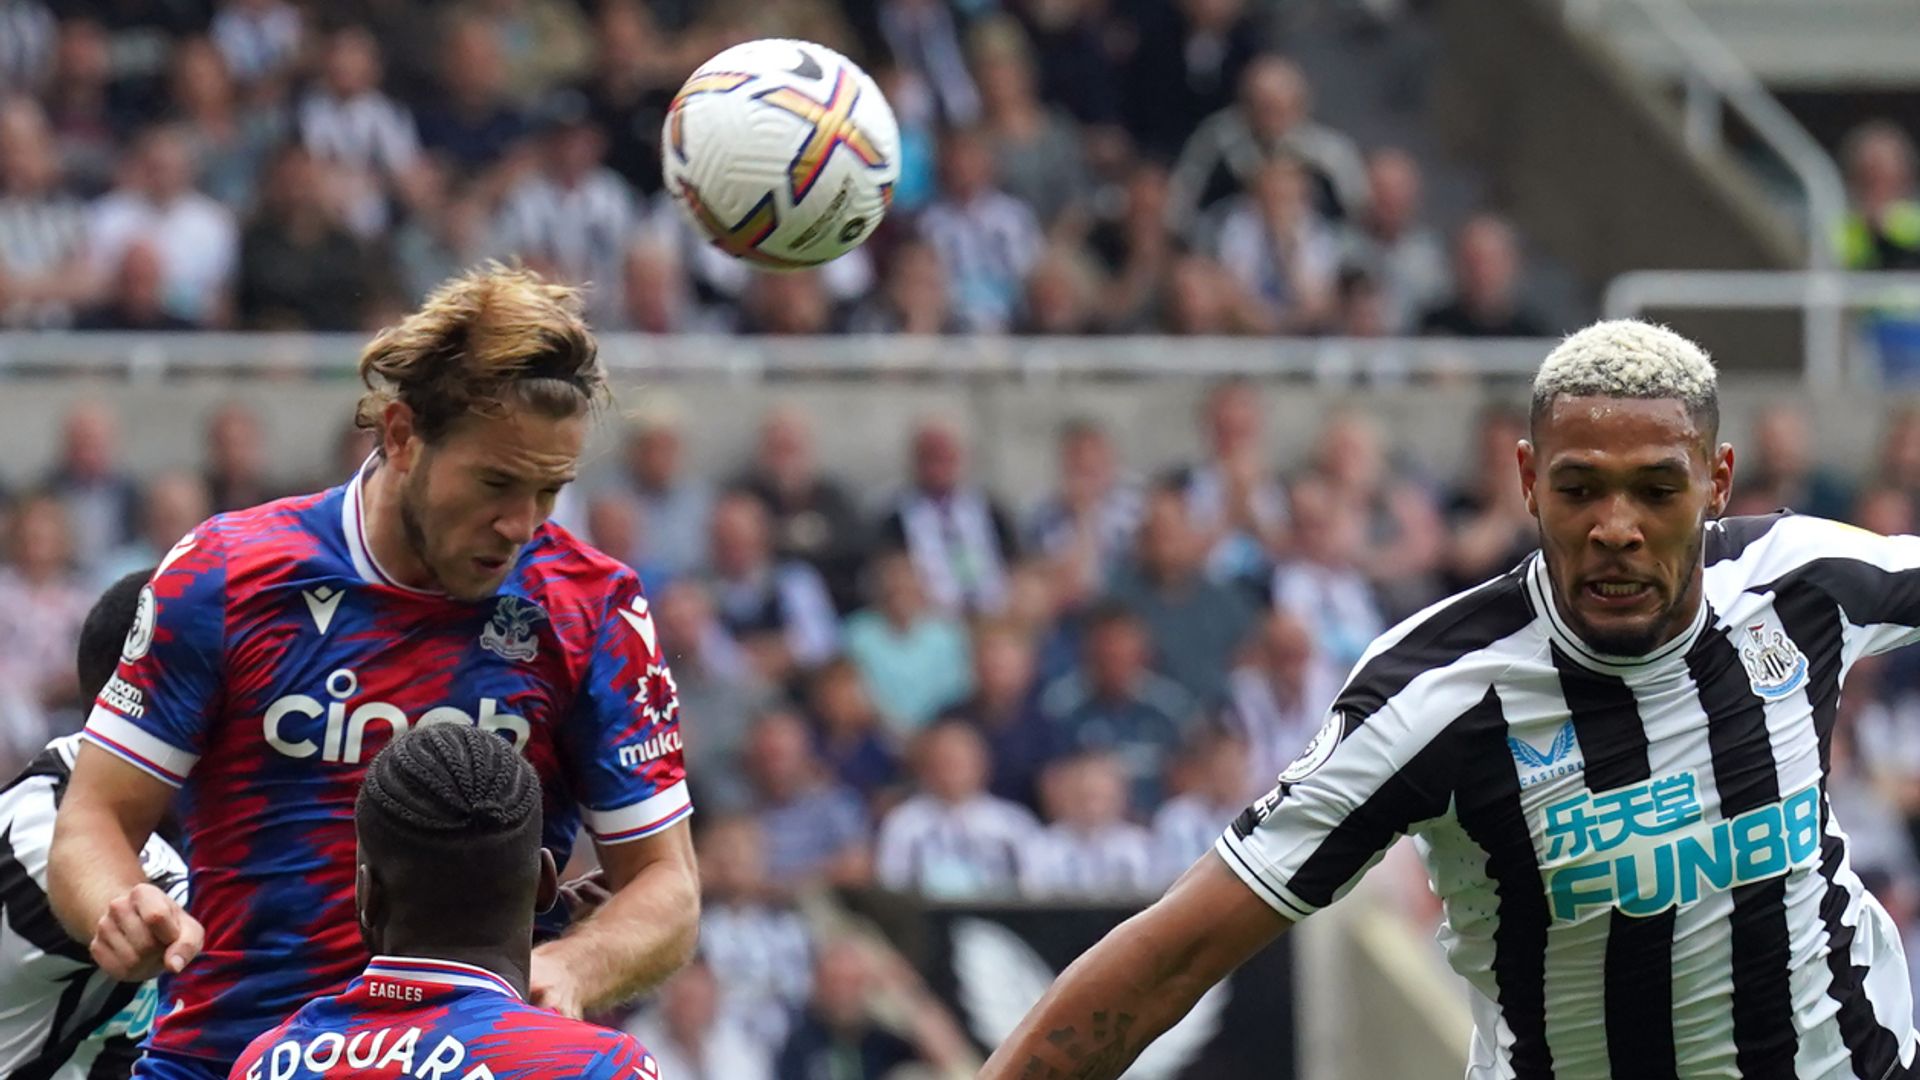 Newcastle denied by VAR in entertaining draw with Palace